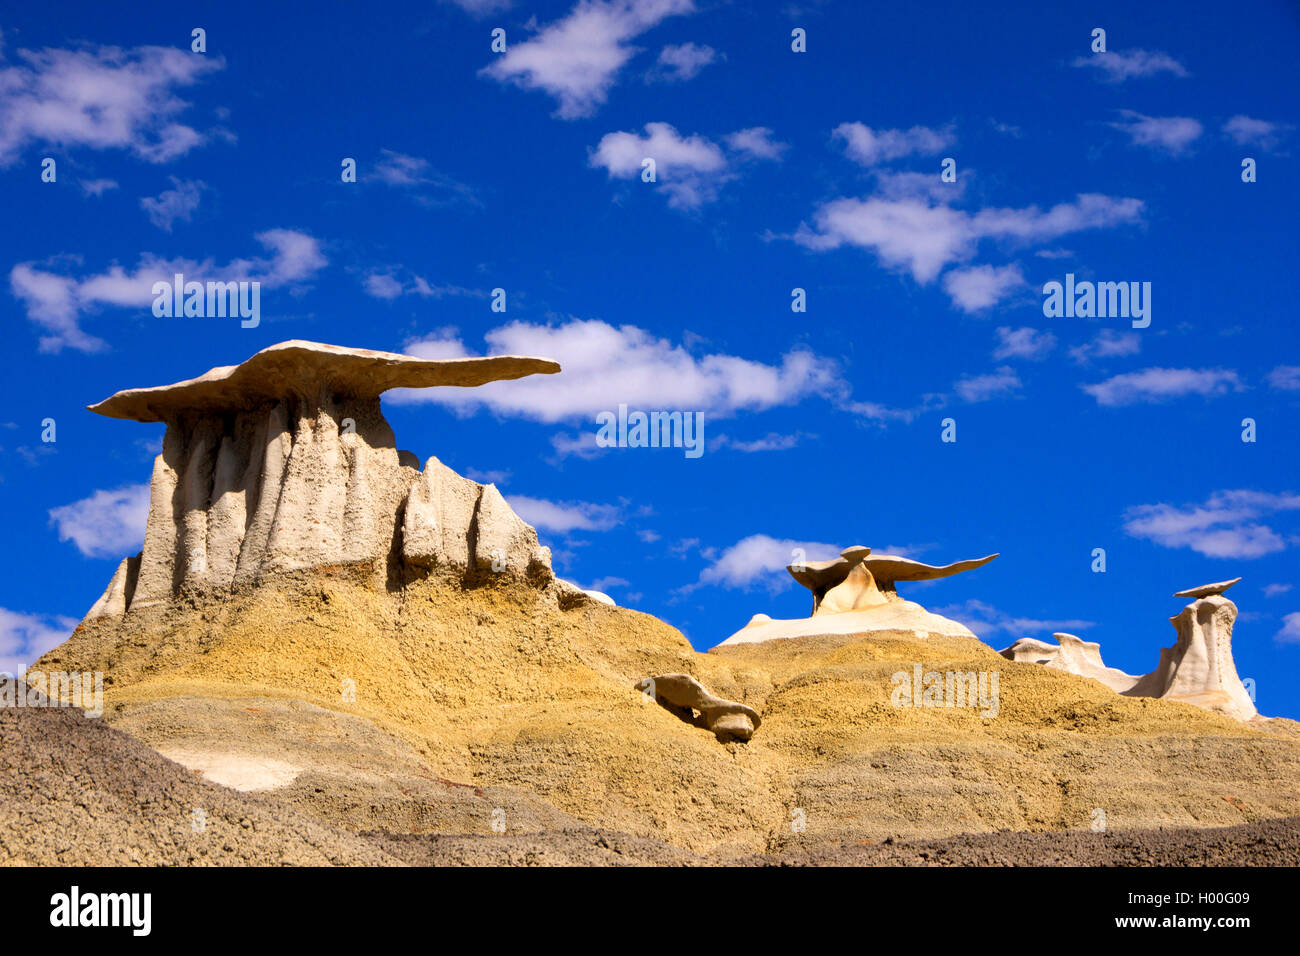 stone hats at the Valley of dreams, USA, New Mexico, Valley of Dreams Stock Photo